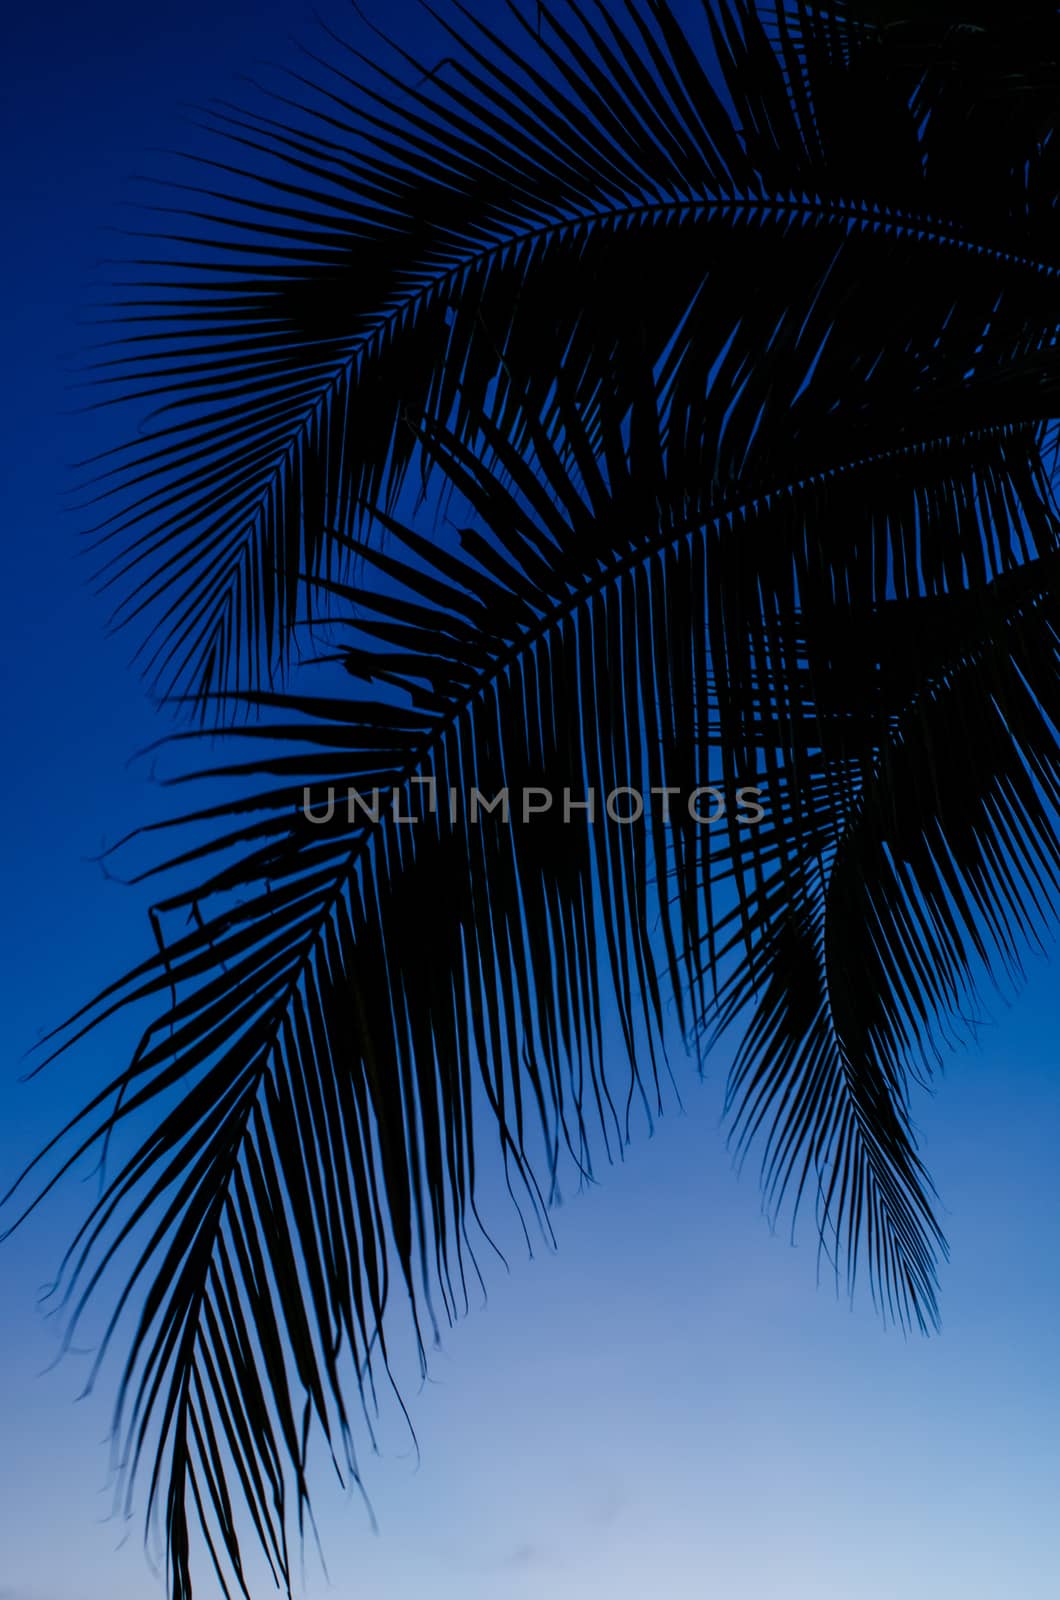 Coconut leaf silhouette with blue sky background by pixbox77